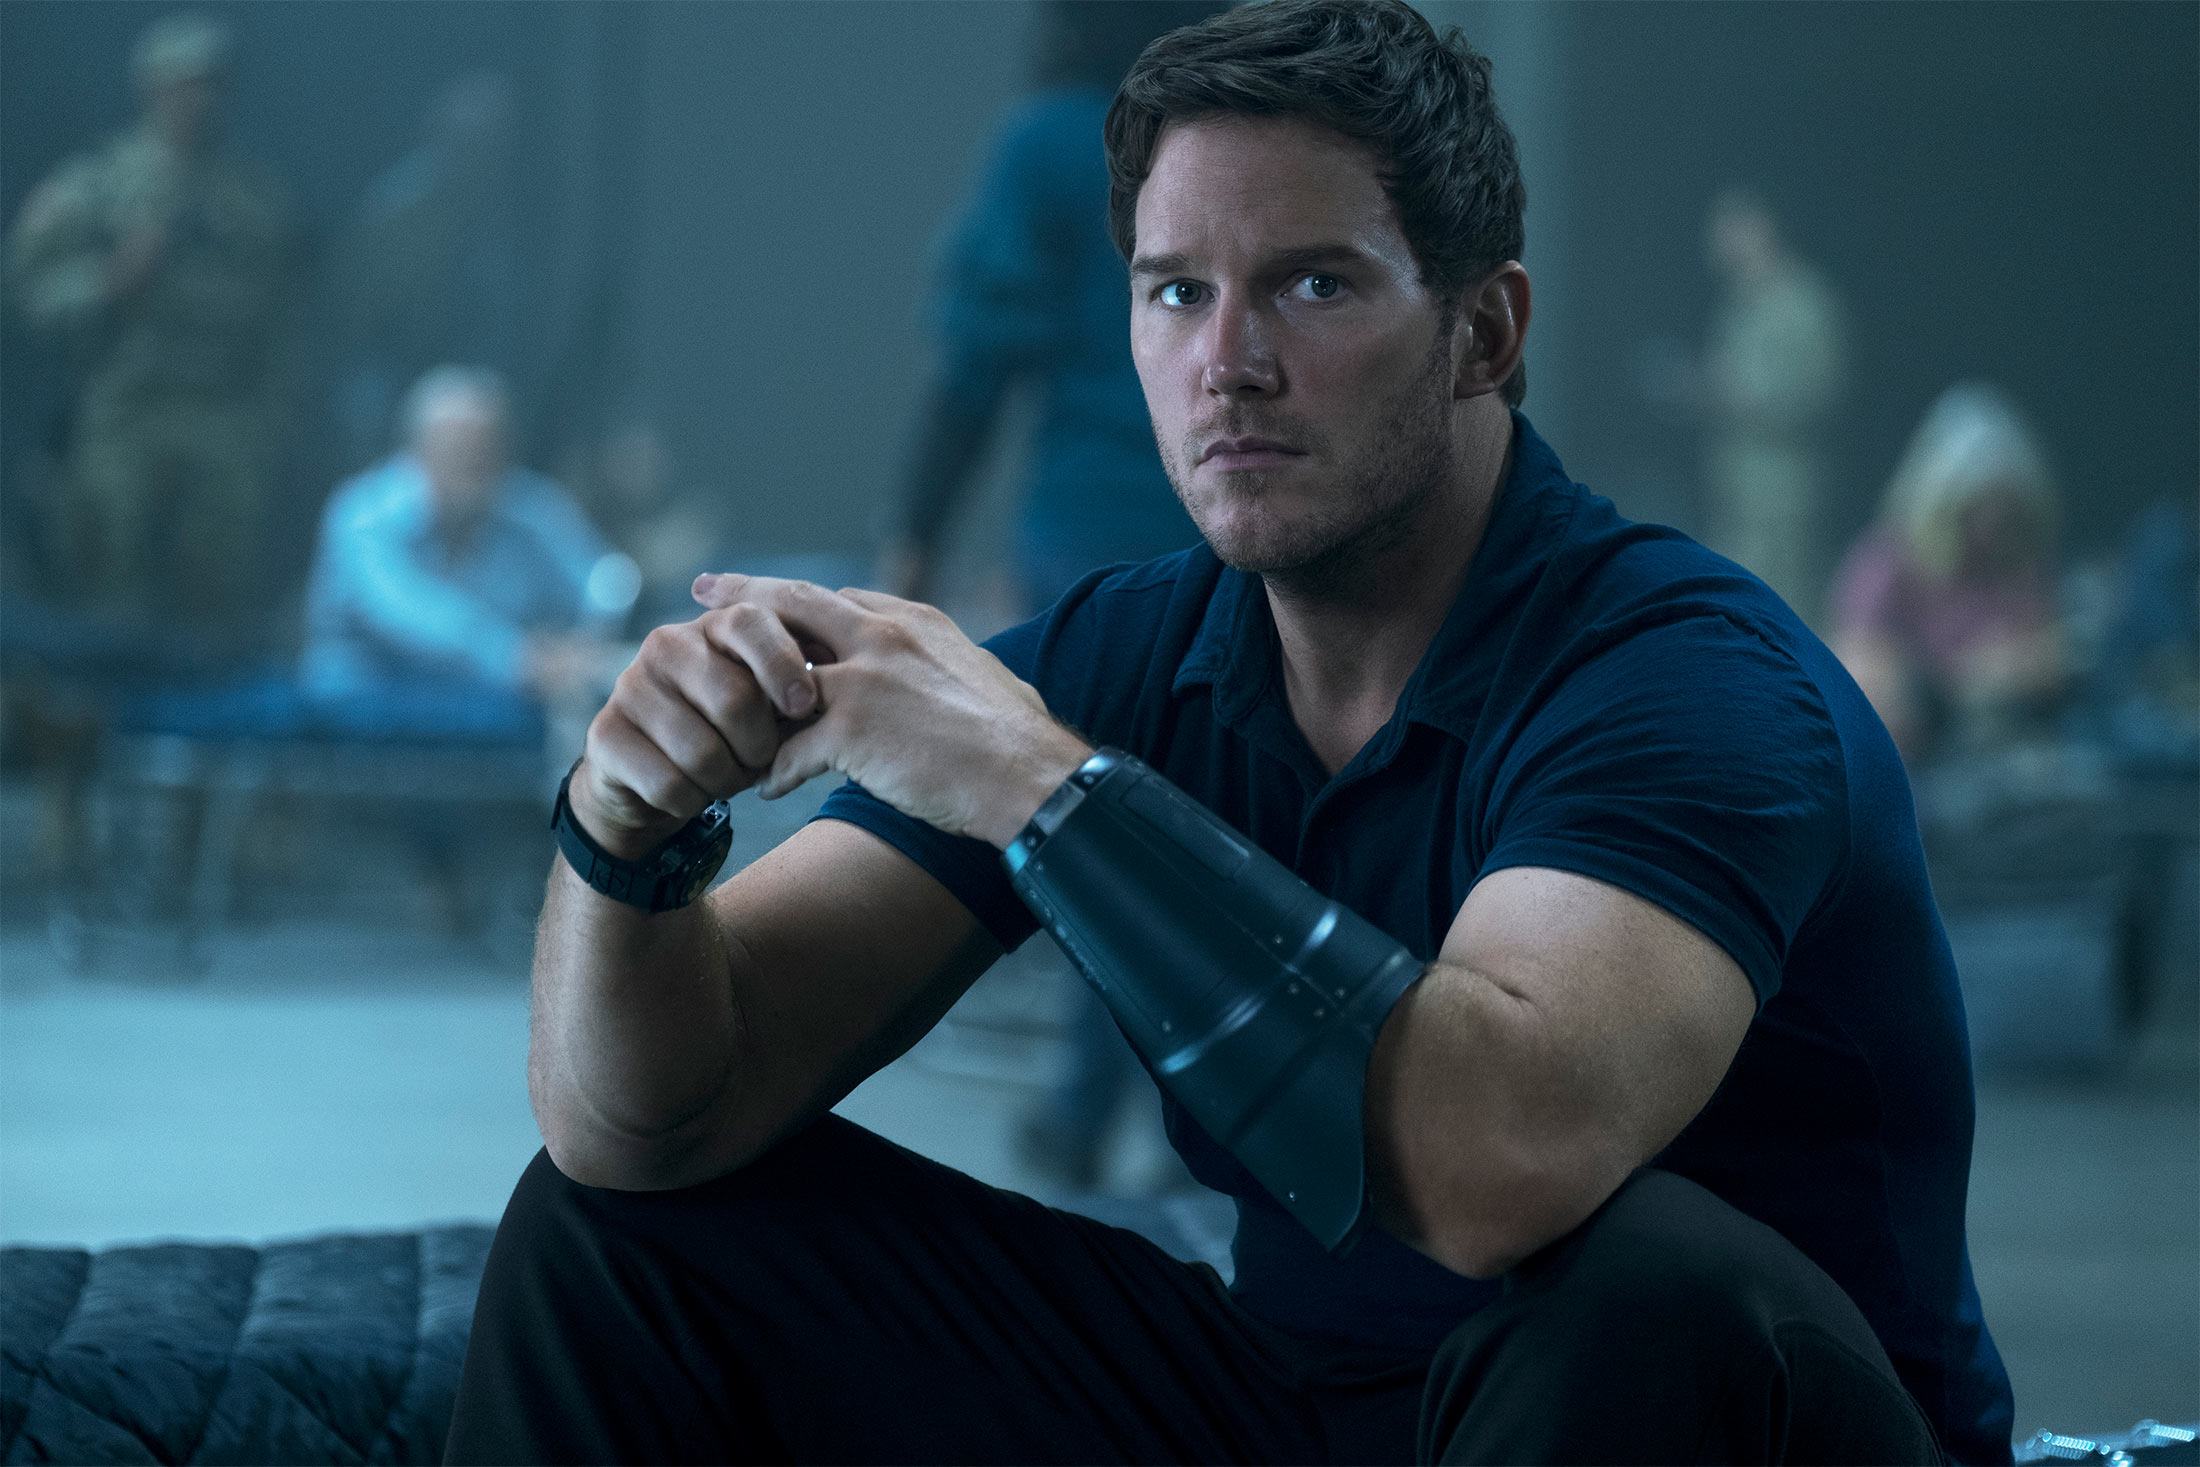 Chris Pratt Worth: How He Makes and Spends His Millions